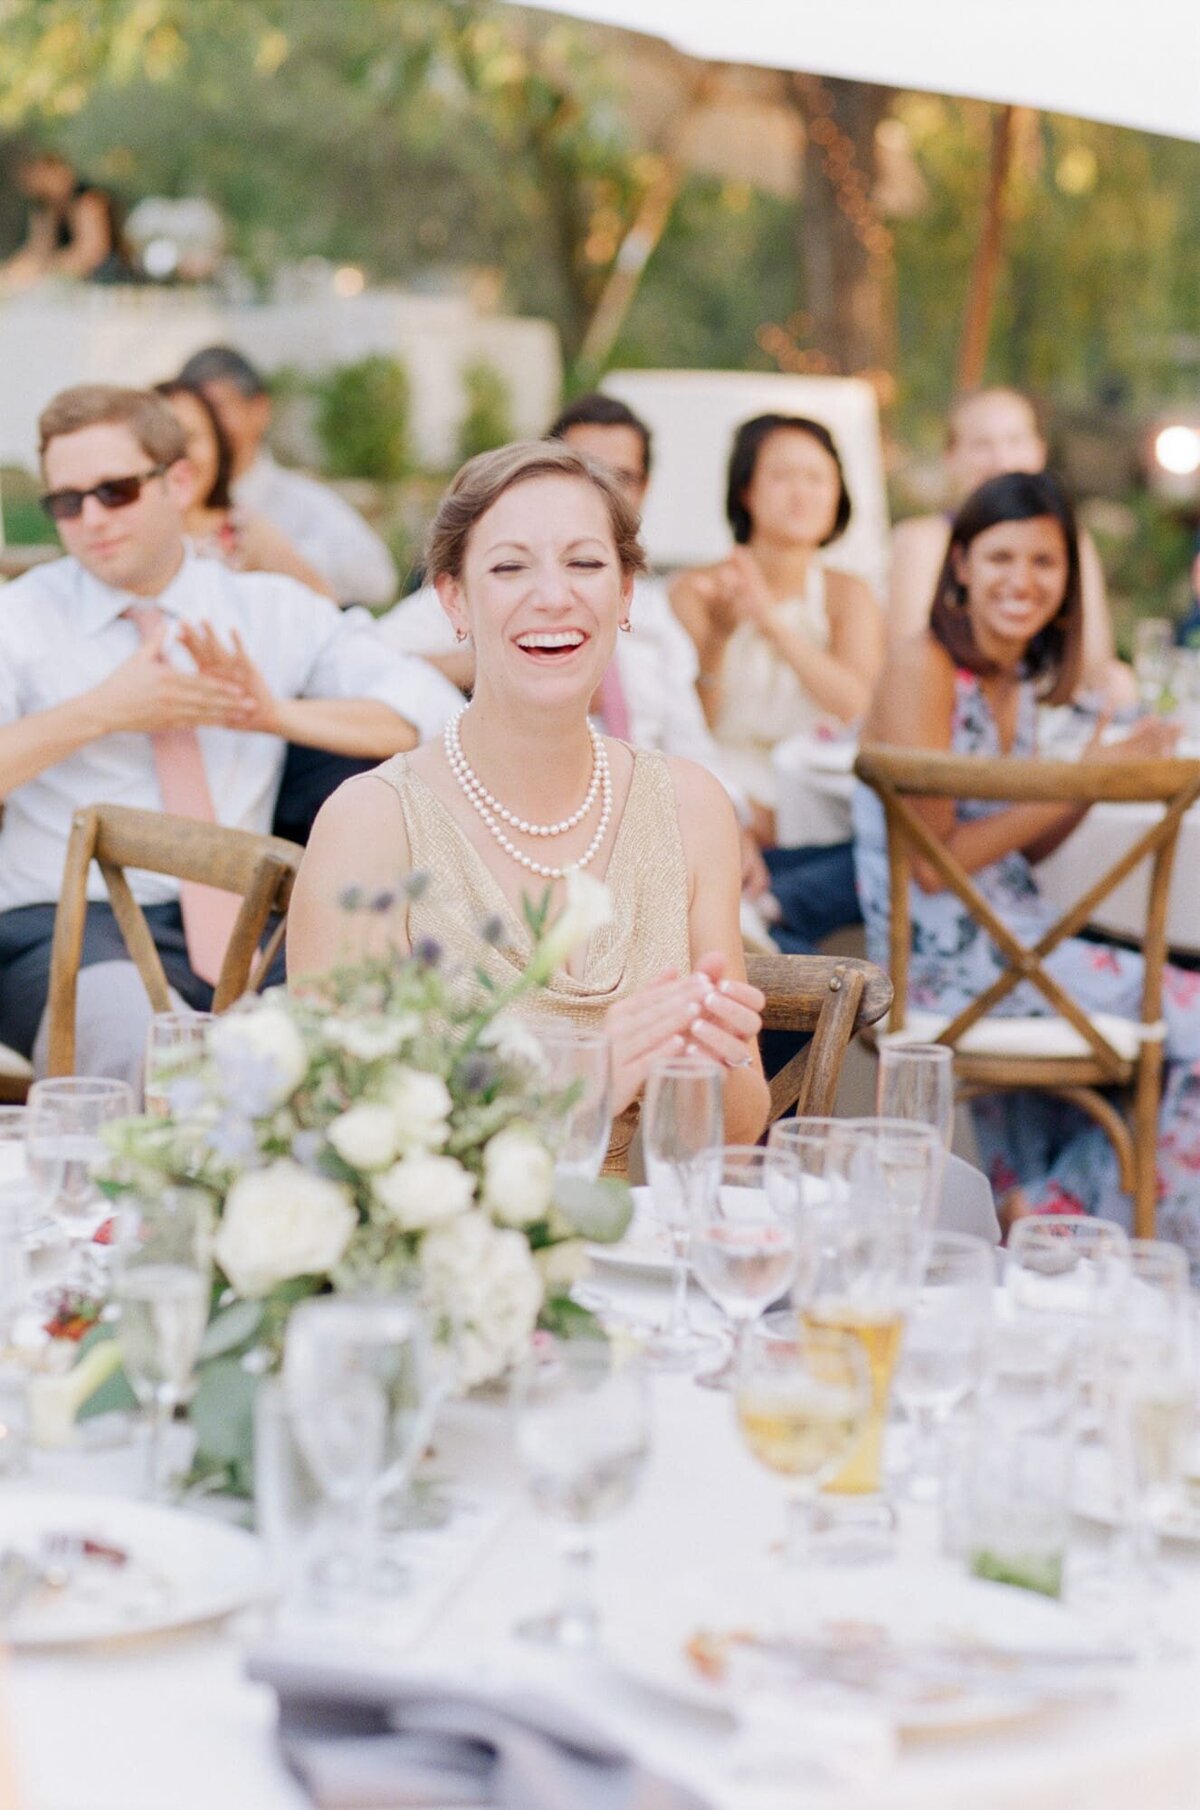 Bride finally sits at her beautifully decorated reception table and entertains her guests.